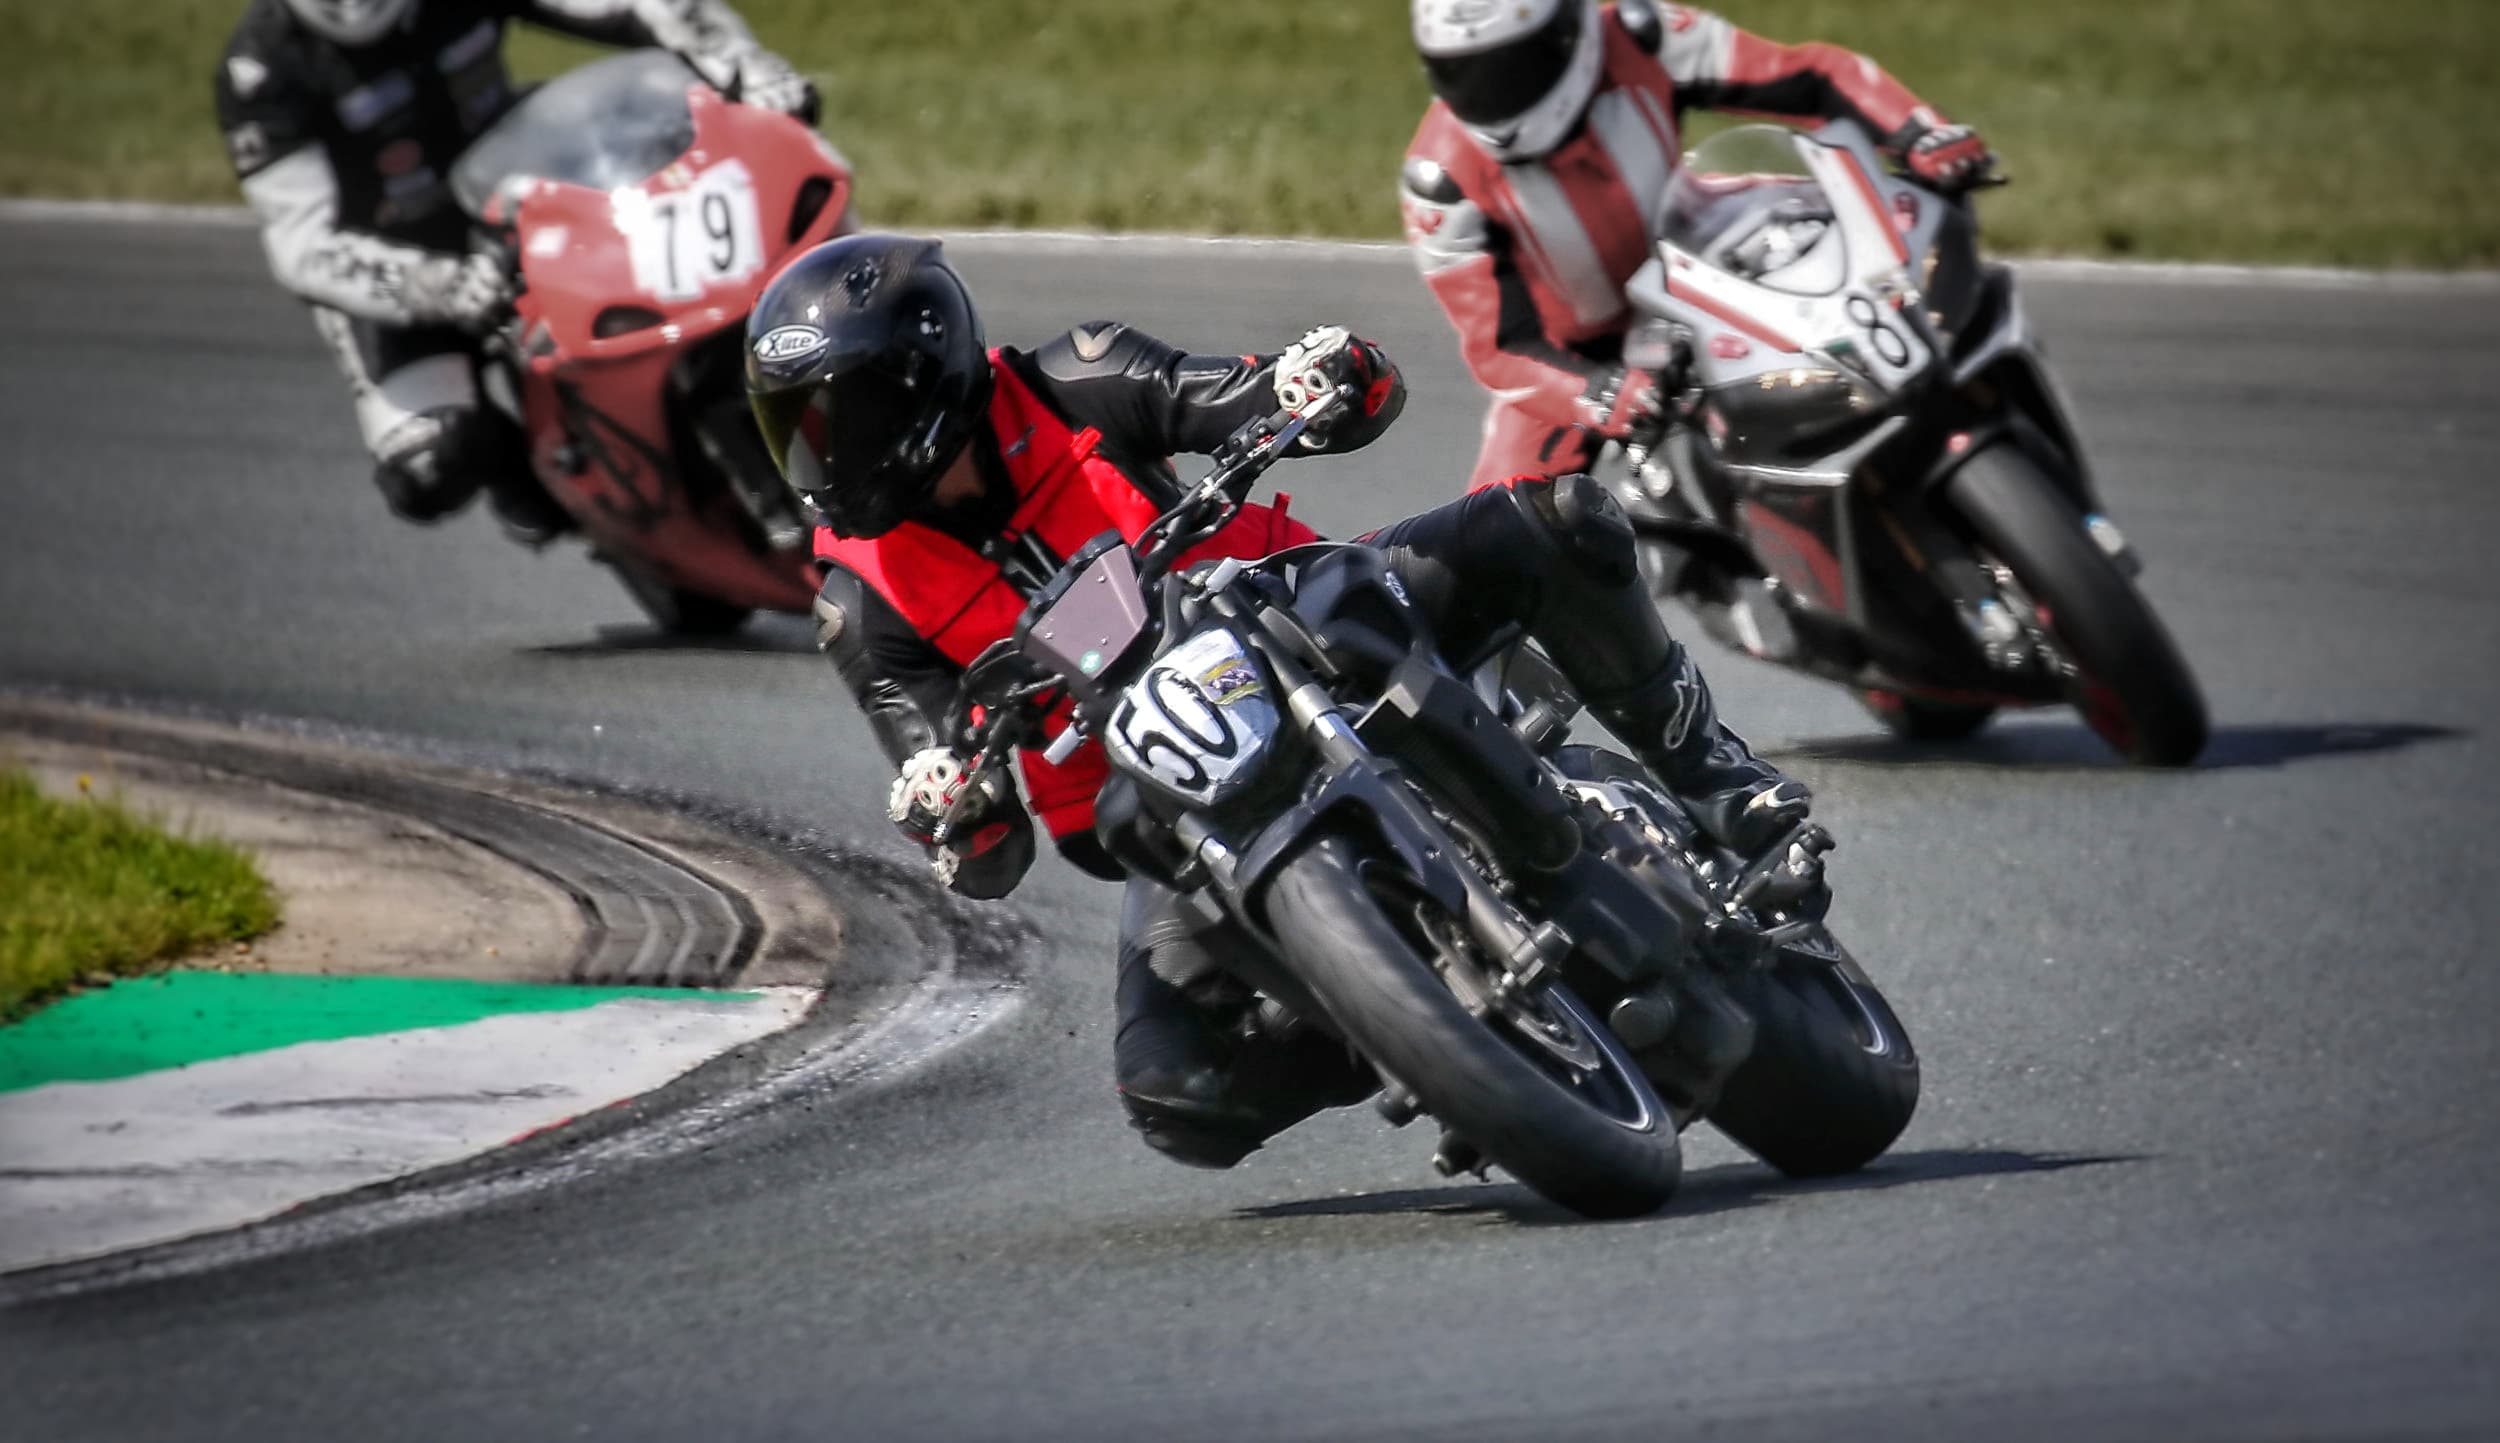 A picture of Alexander Oliver Mader riding his motorcycle (a Yamaha MT 07) at the racetrack Motorsport Arena in Oschersleben, Germany.